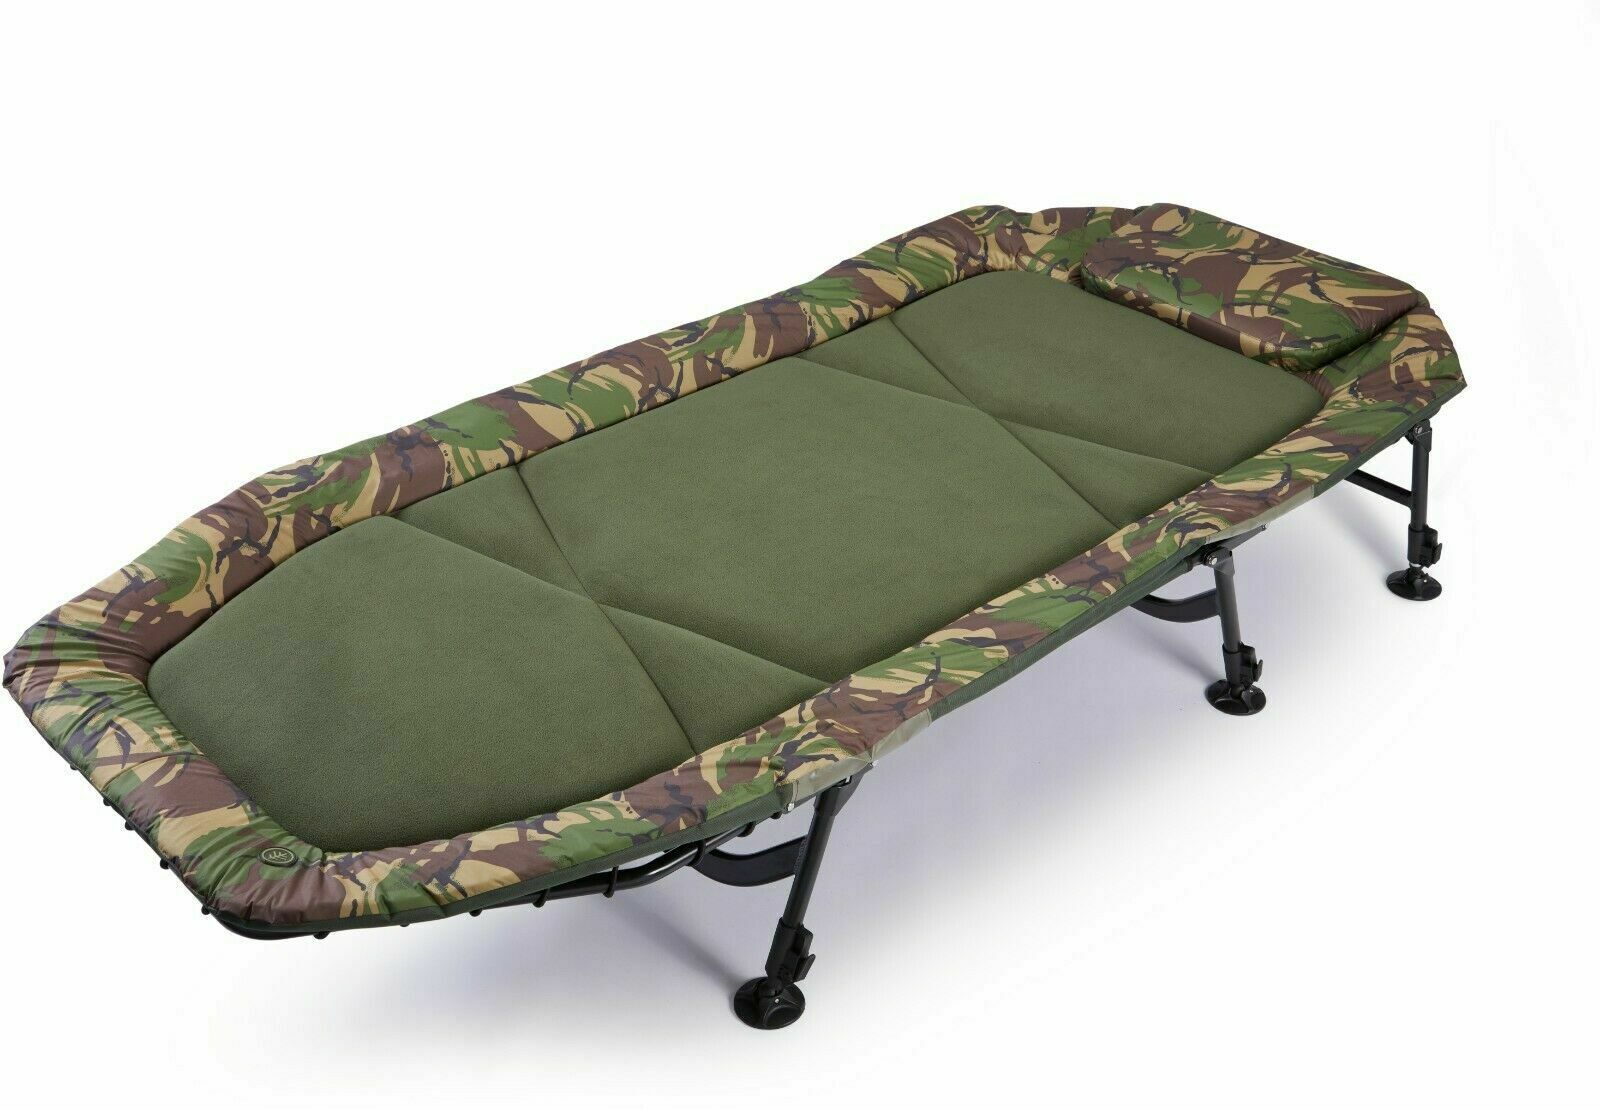 Wychwood Tactical X Flatbed Carp Fishing Bedchair Compact - Q5017 - *All  Models in stock*